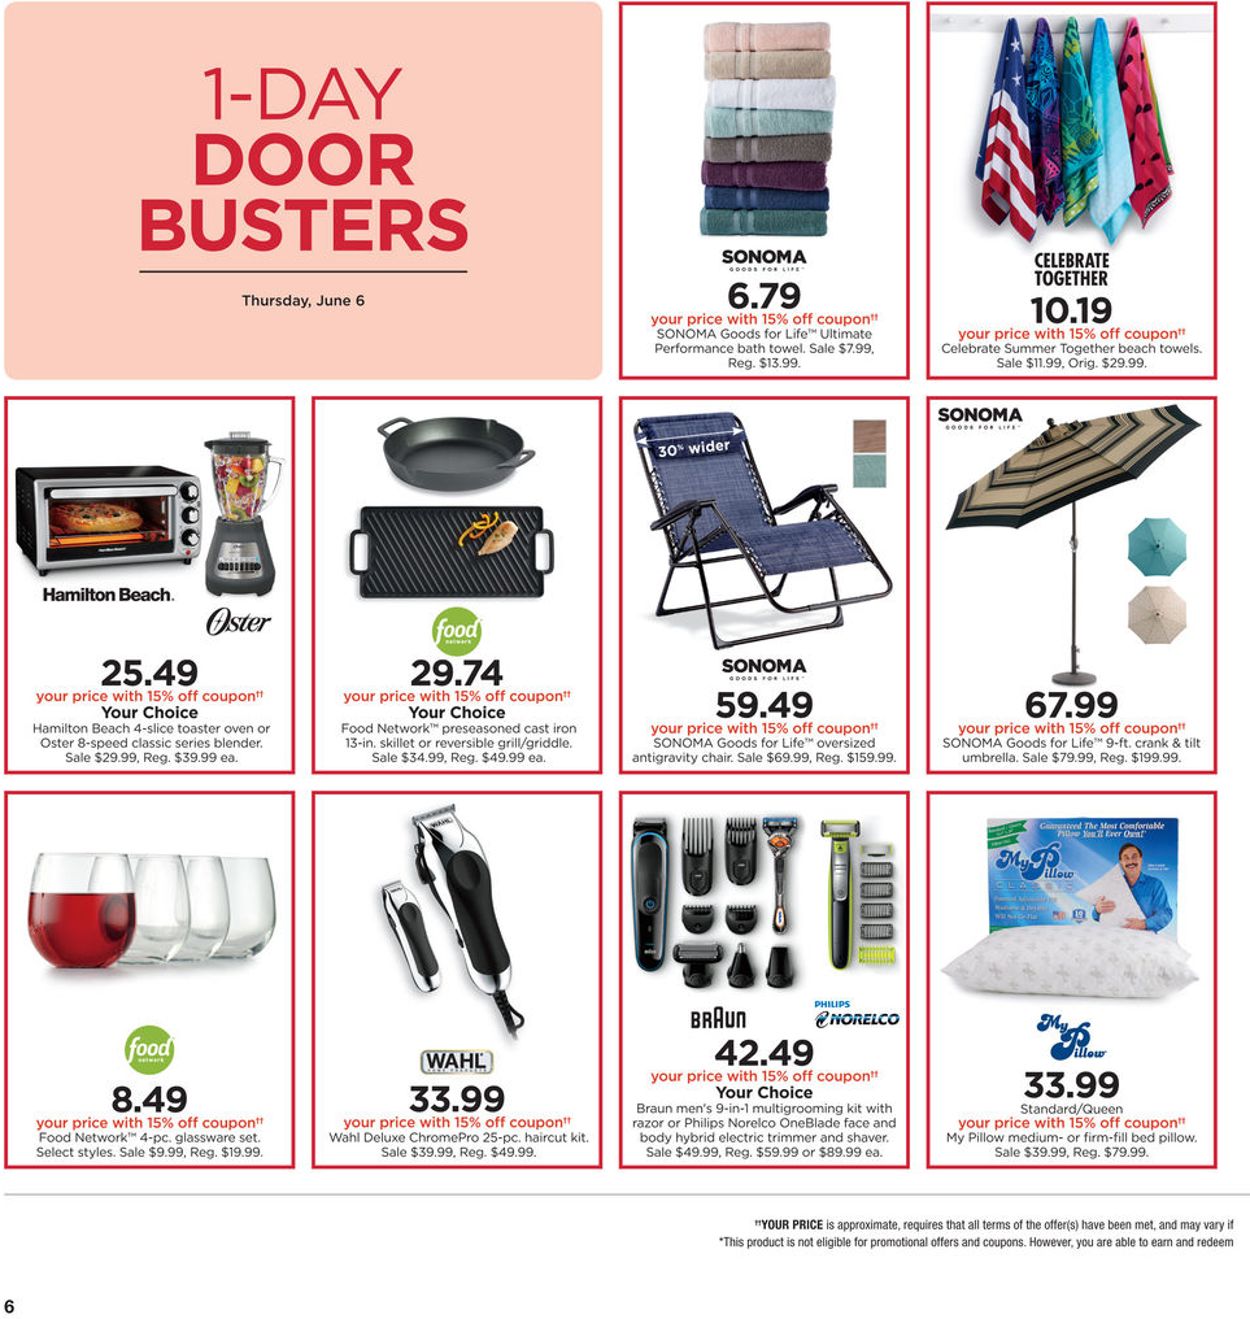 Kohl's Current weekly ad 06/06 - 06/16/2019 [6] - frequent-ads.com